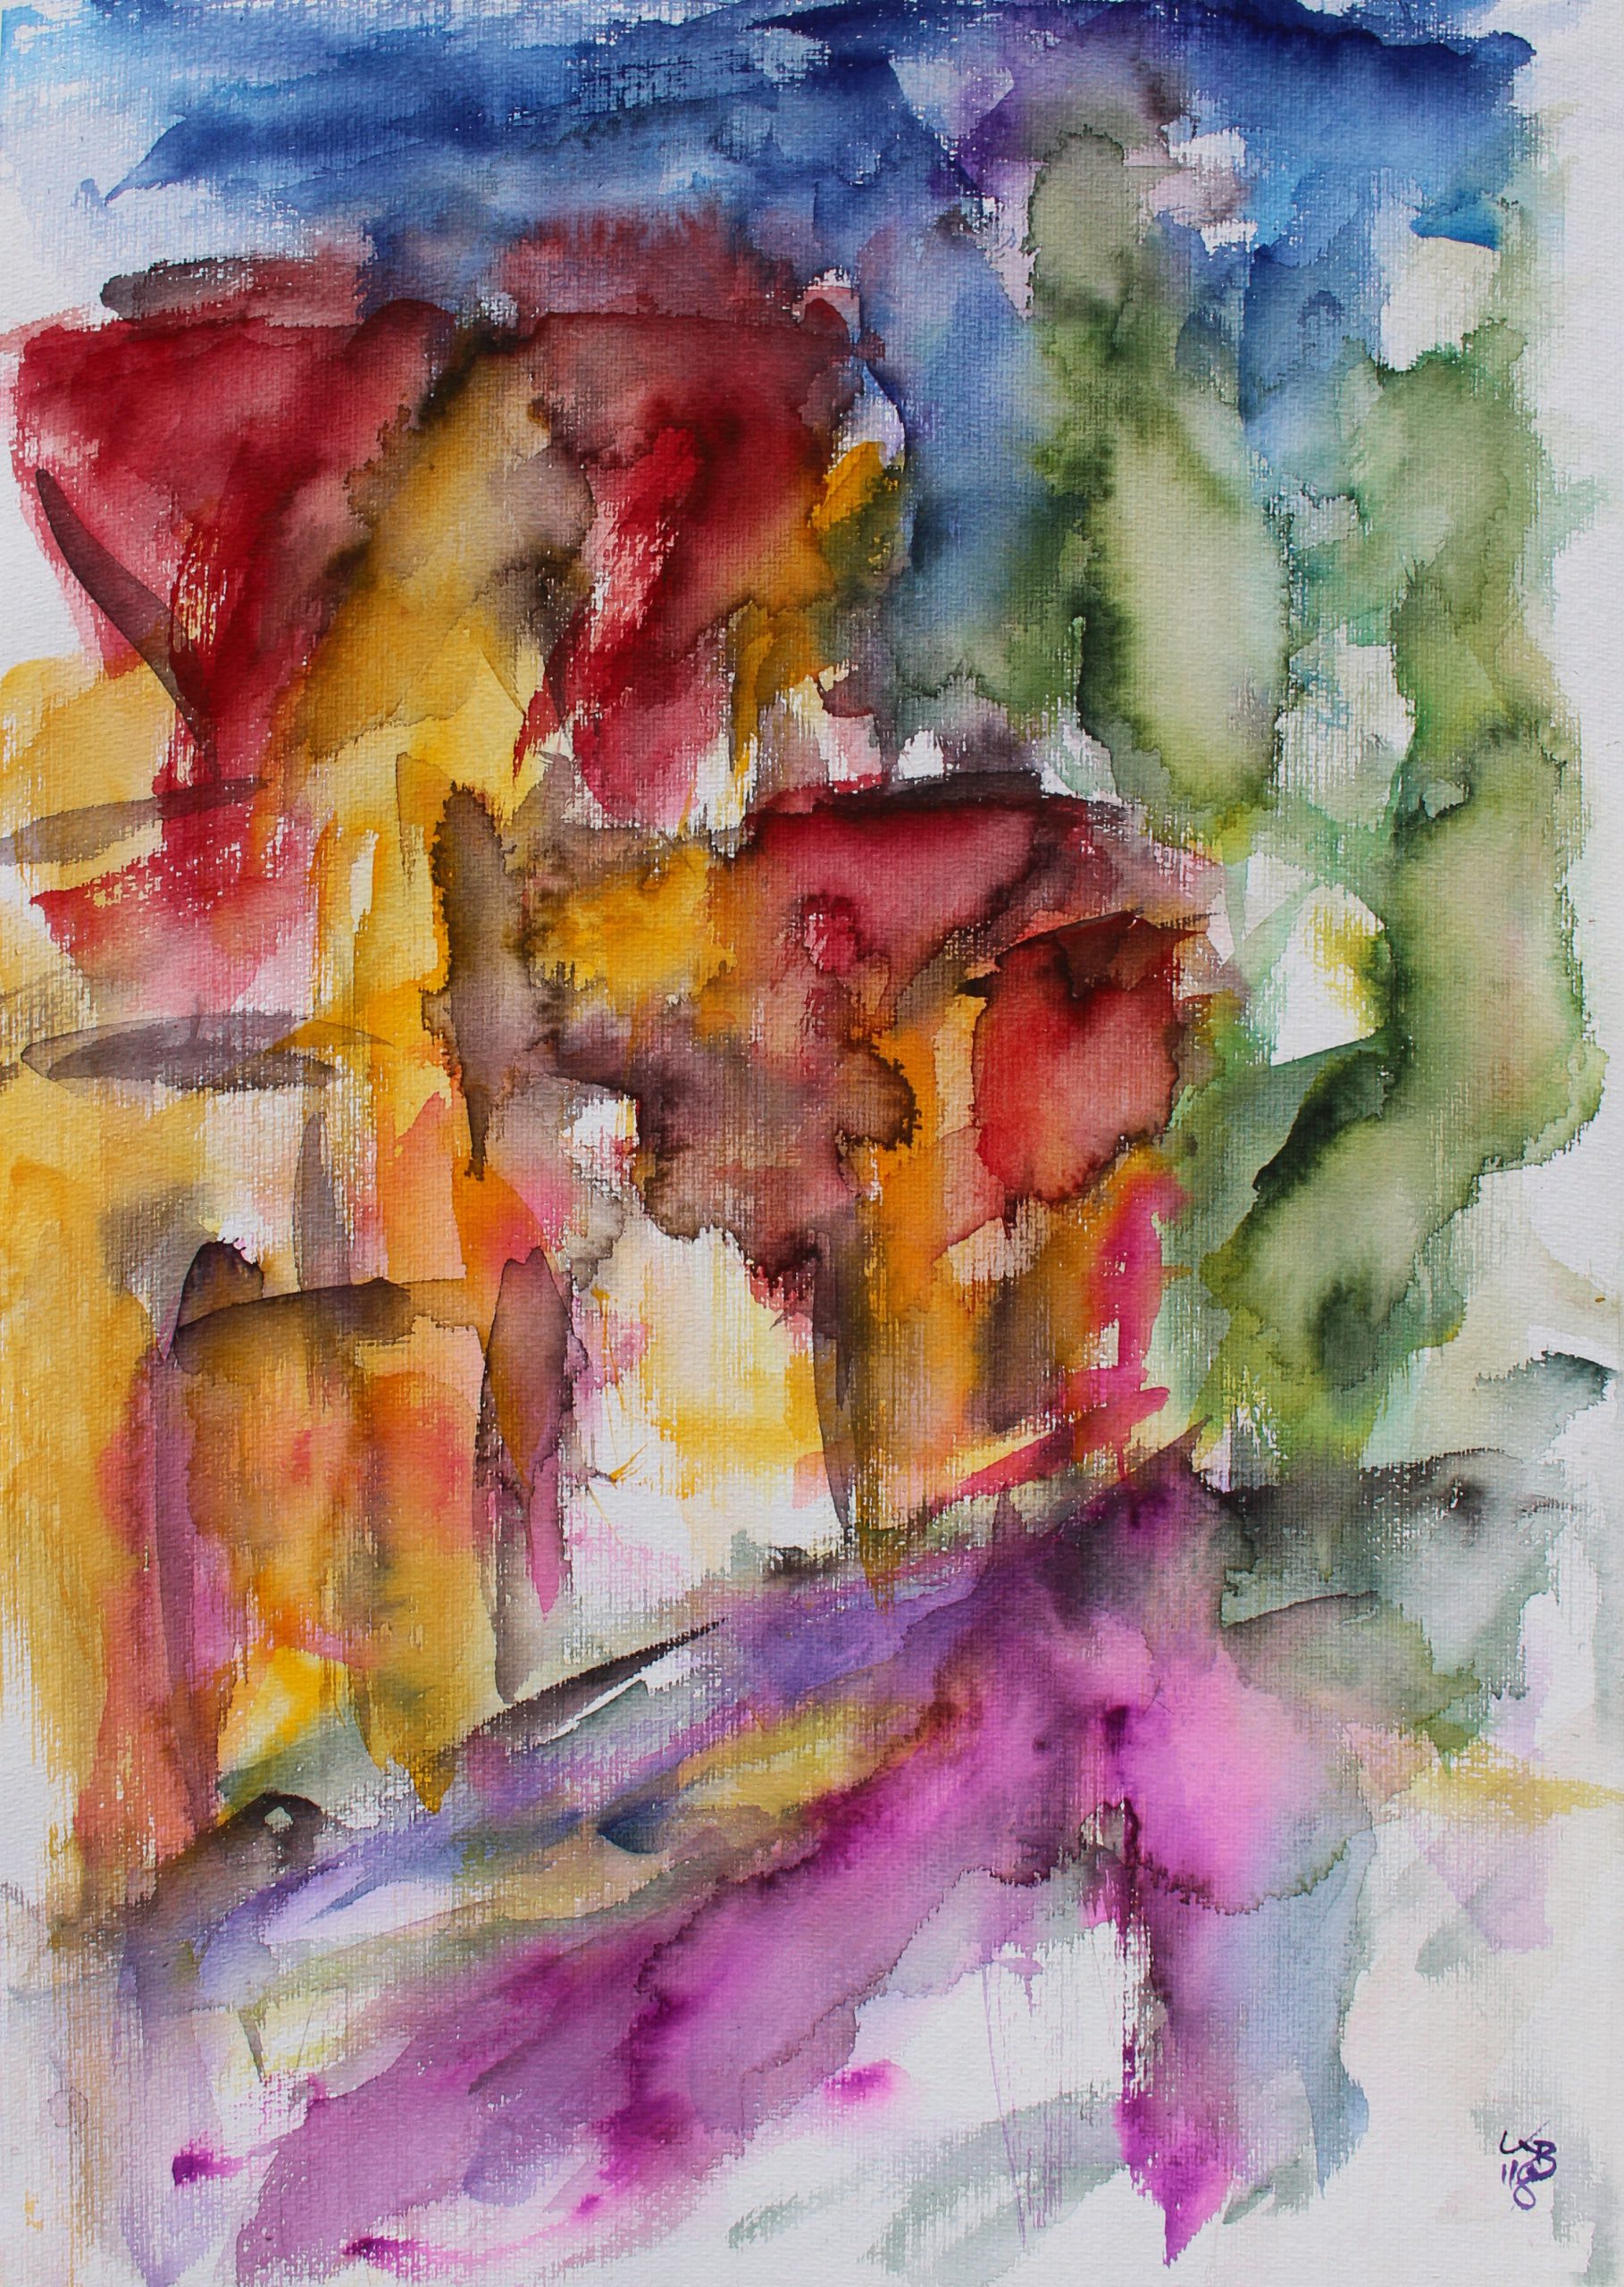 changing places IV, Homberg, Kirchgasse, Watercolour 50 x 70 cm, © 2018 by Klaus Bölling